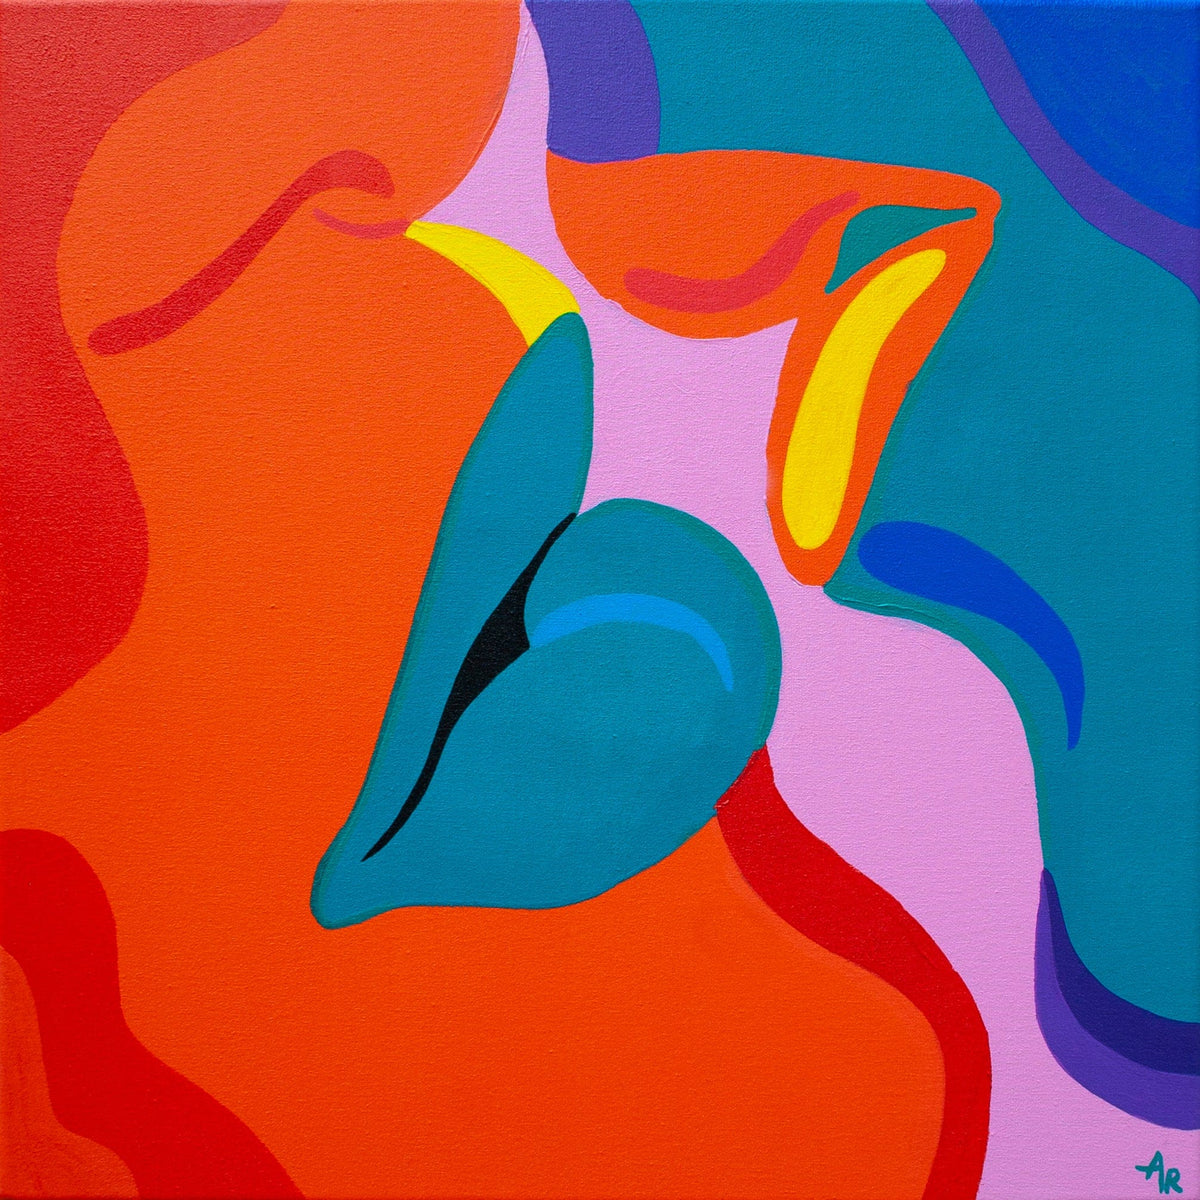 Affection Original Painting by Agate Rubene